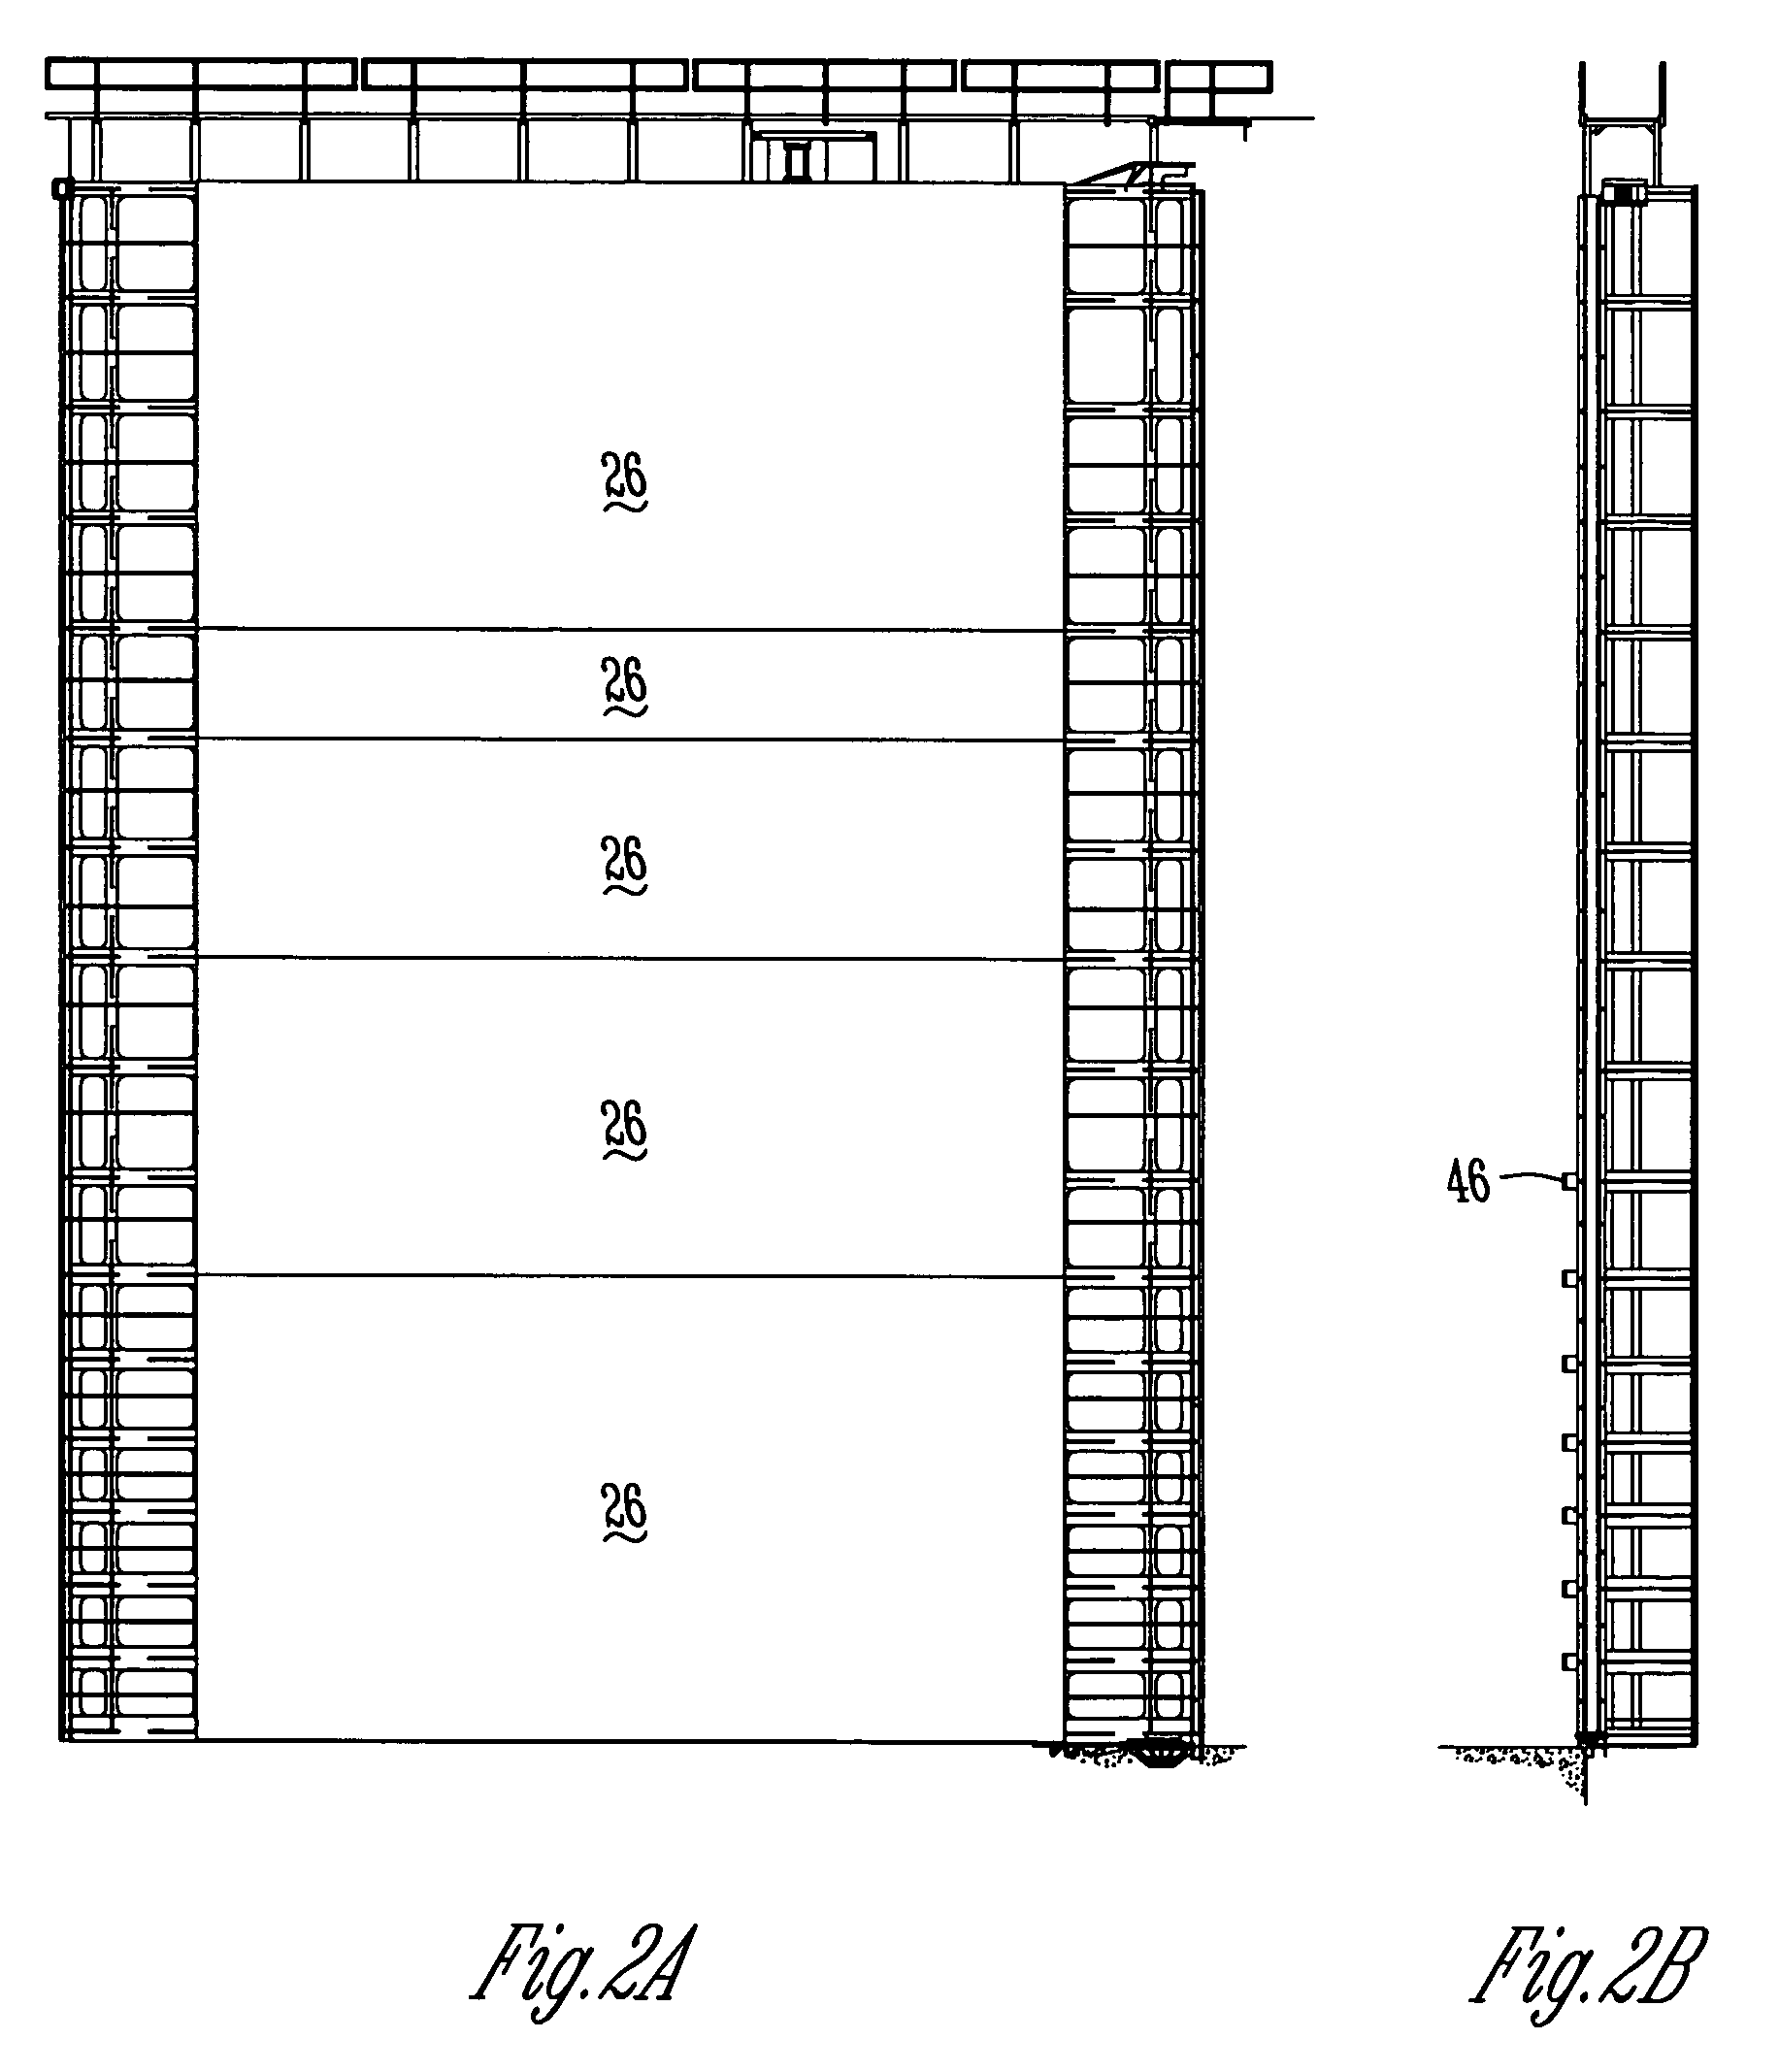 Method and apparatus for an improved lock and dam assembly